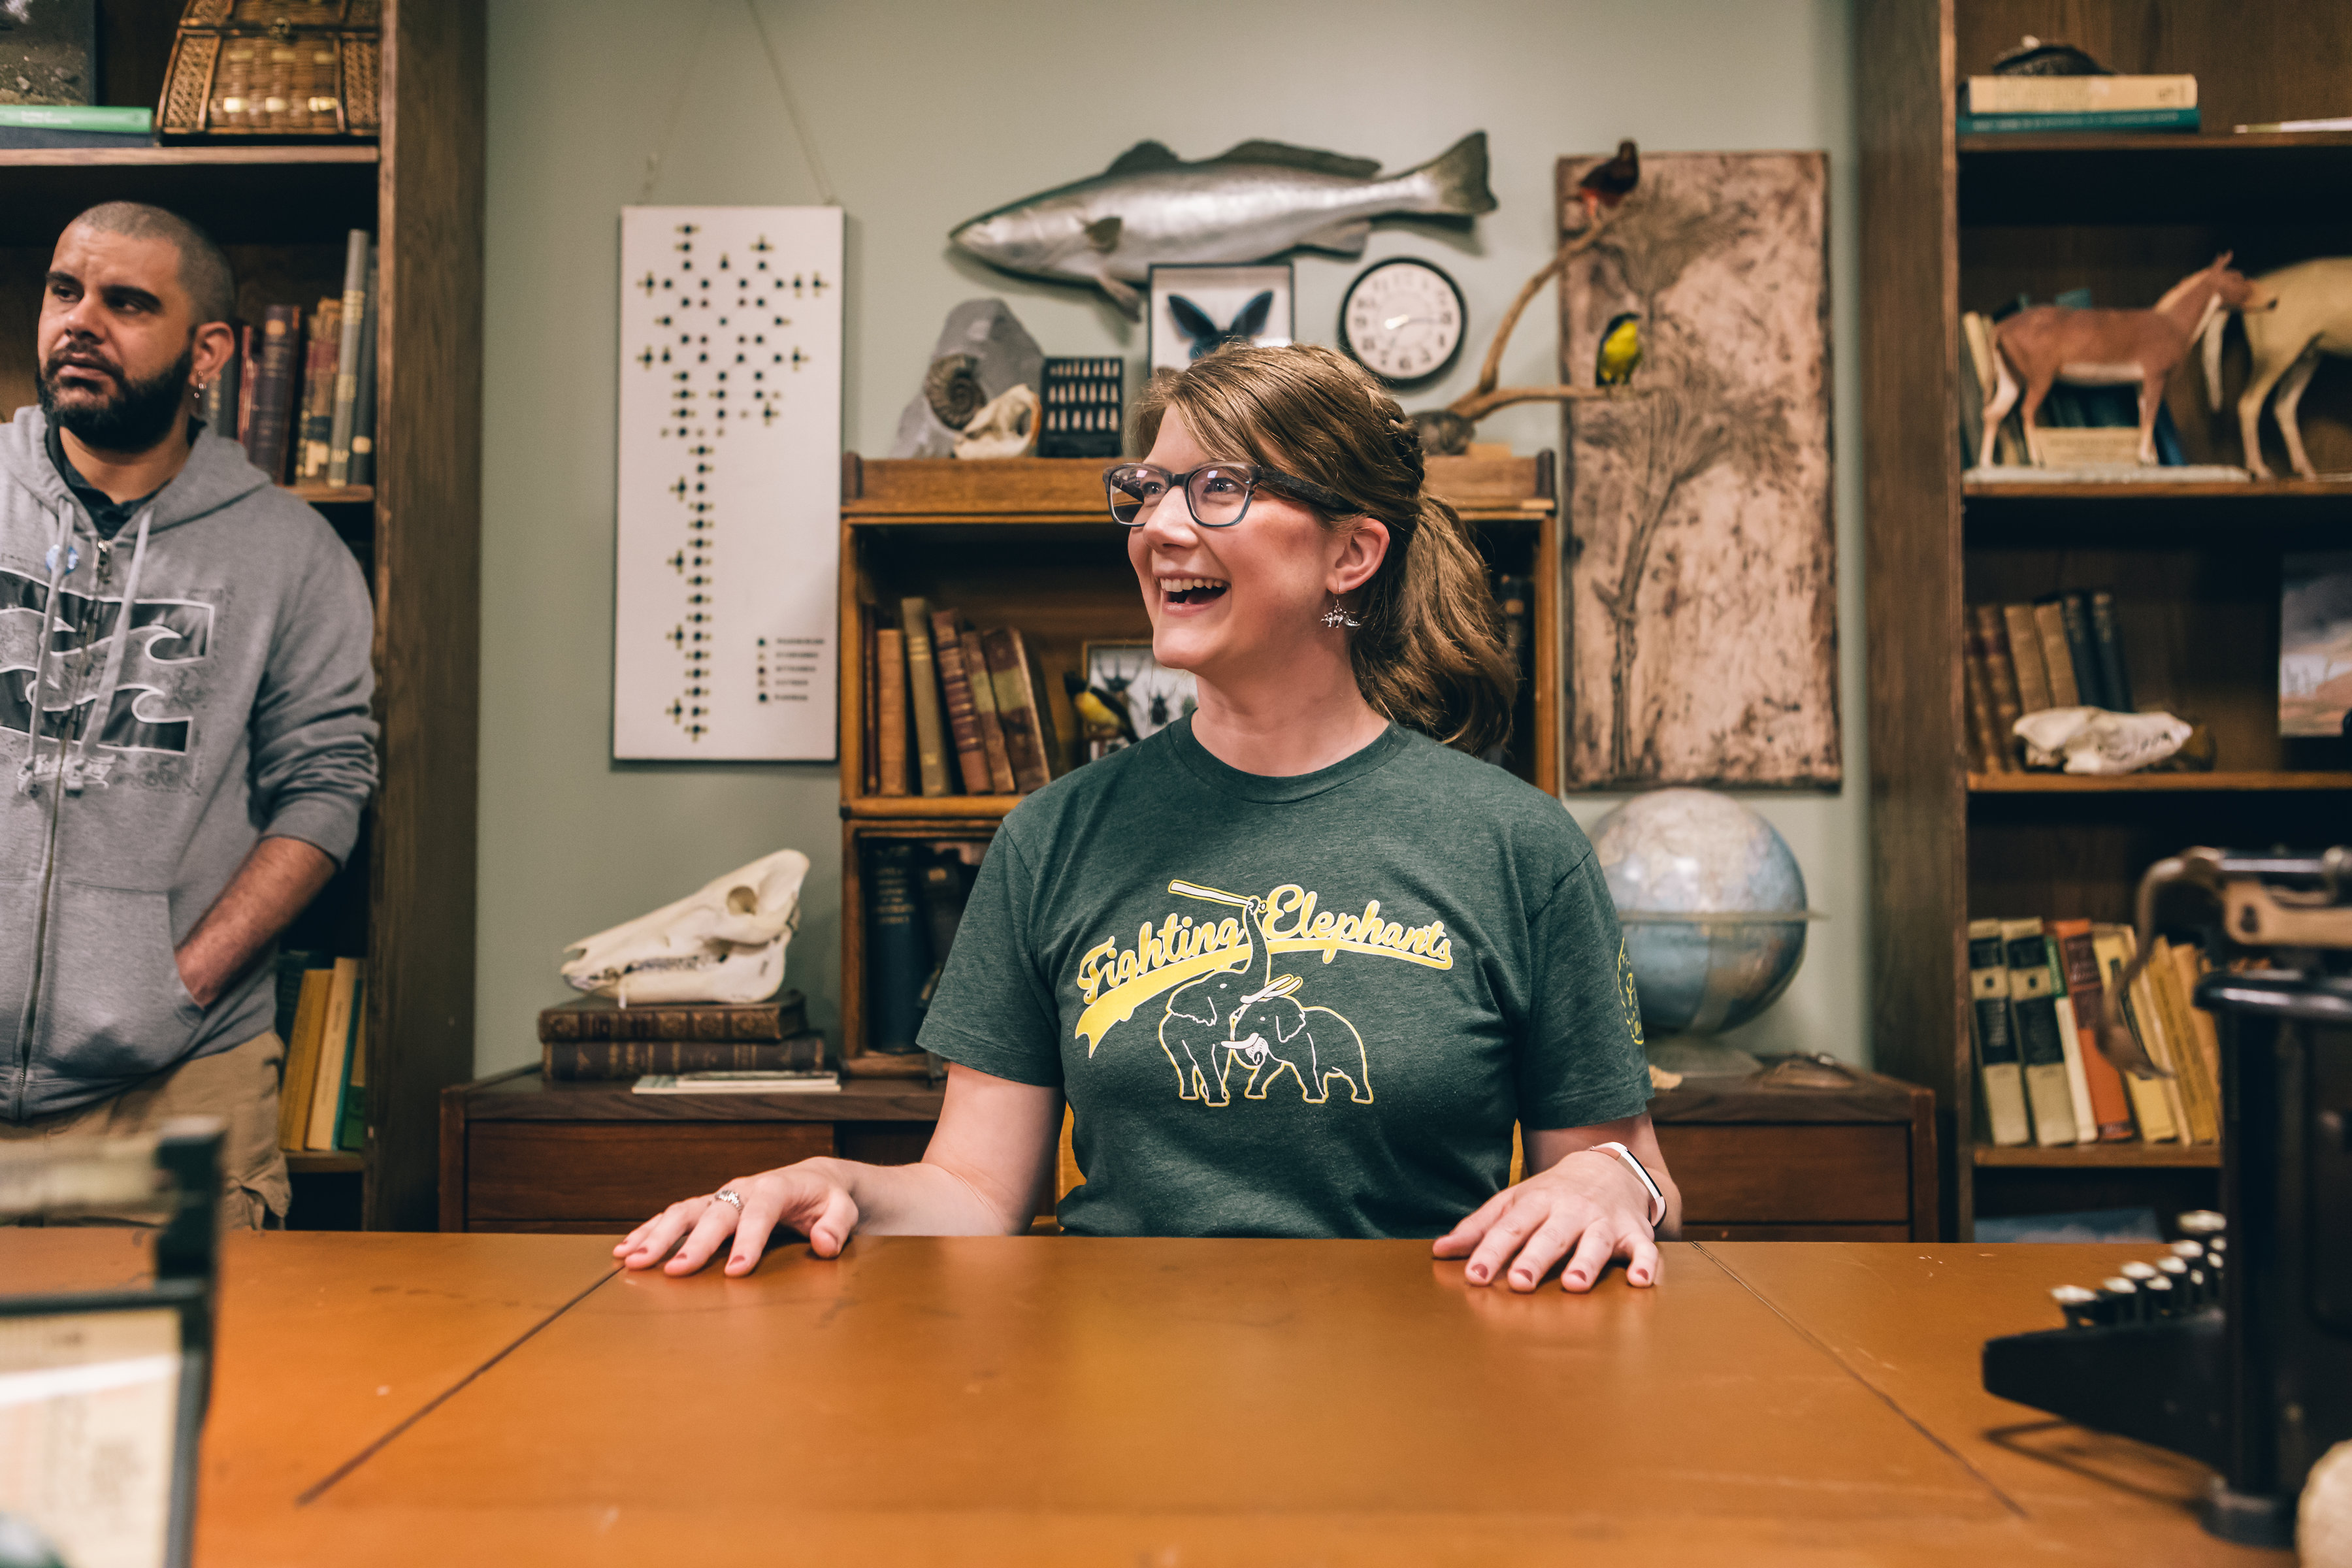 Emily Graslie smiles and looks to her right, while sitting at a desk. Books and specimens are visible in the background.